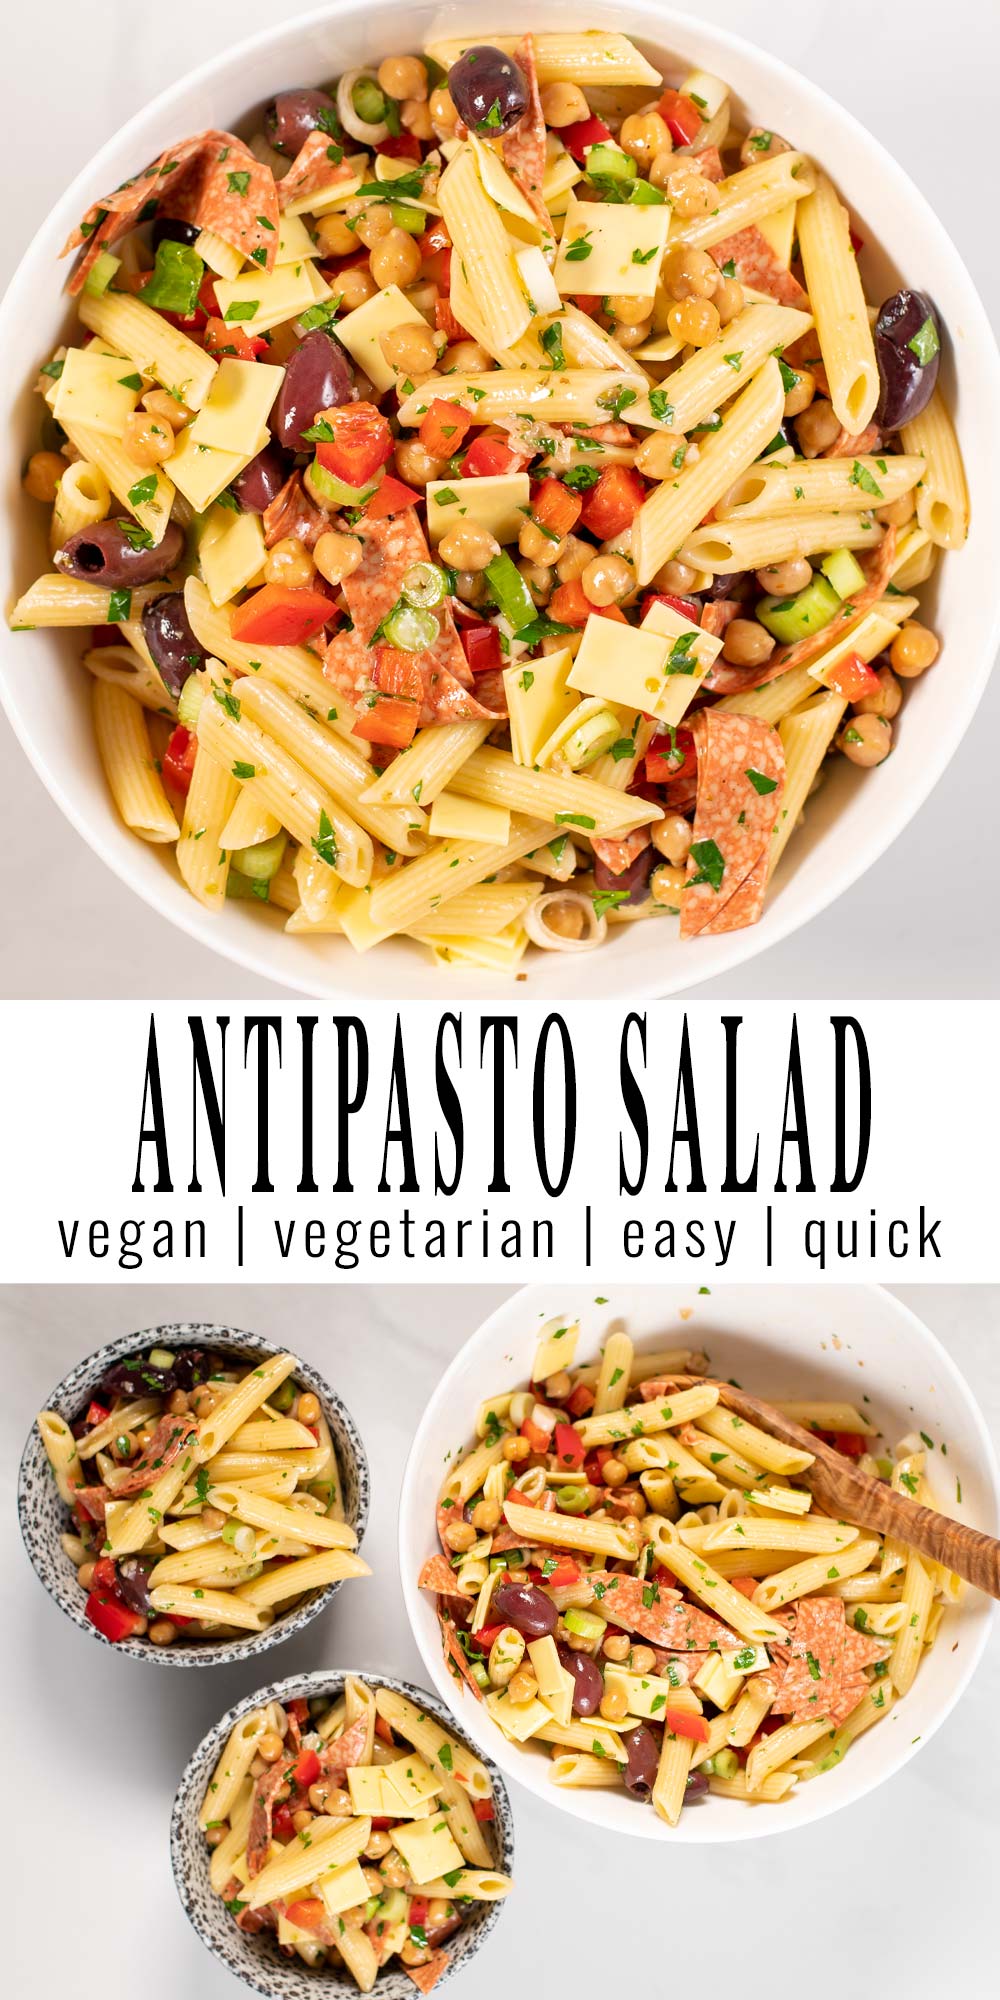 Collage of two photos of Antipasto Salad with recipe title text.